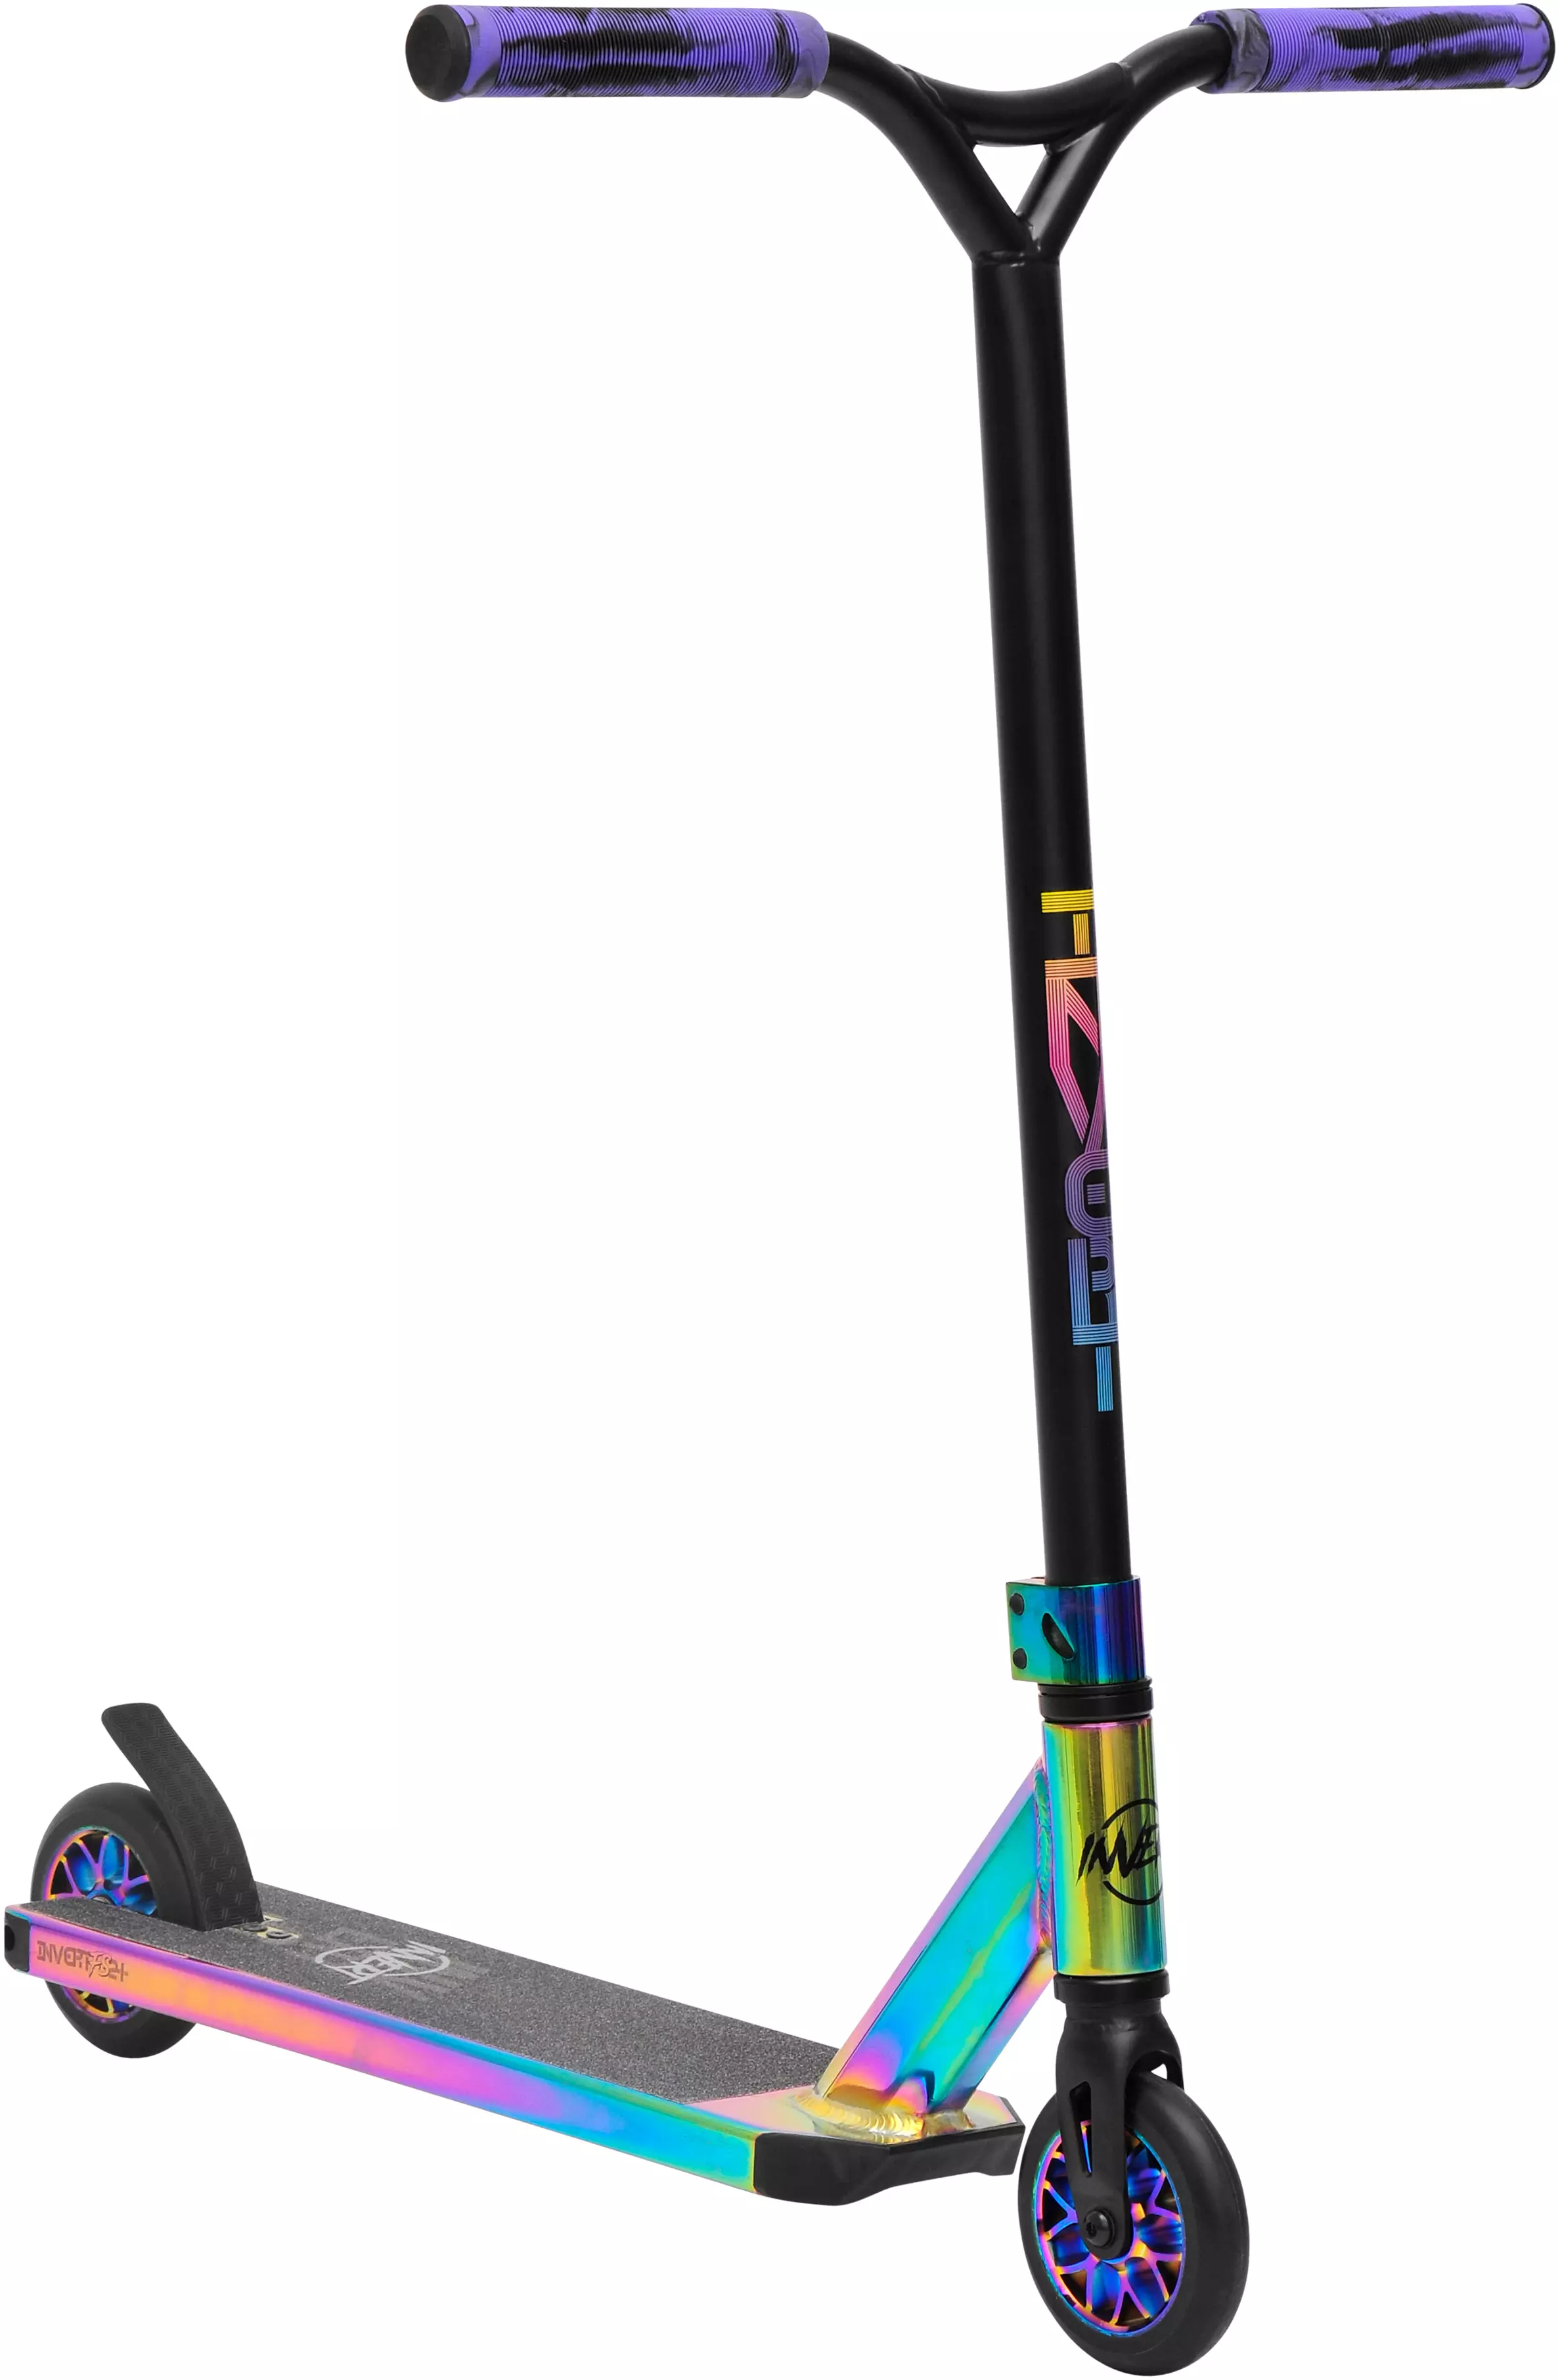 best stunt scooters for kids